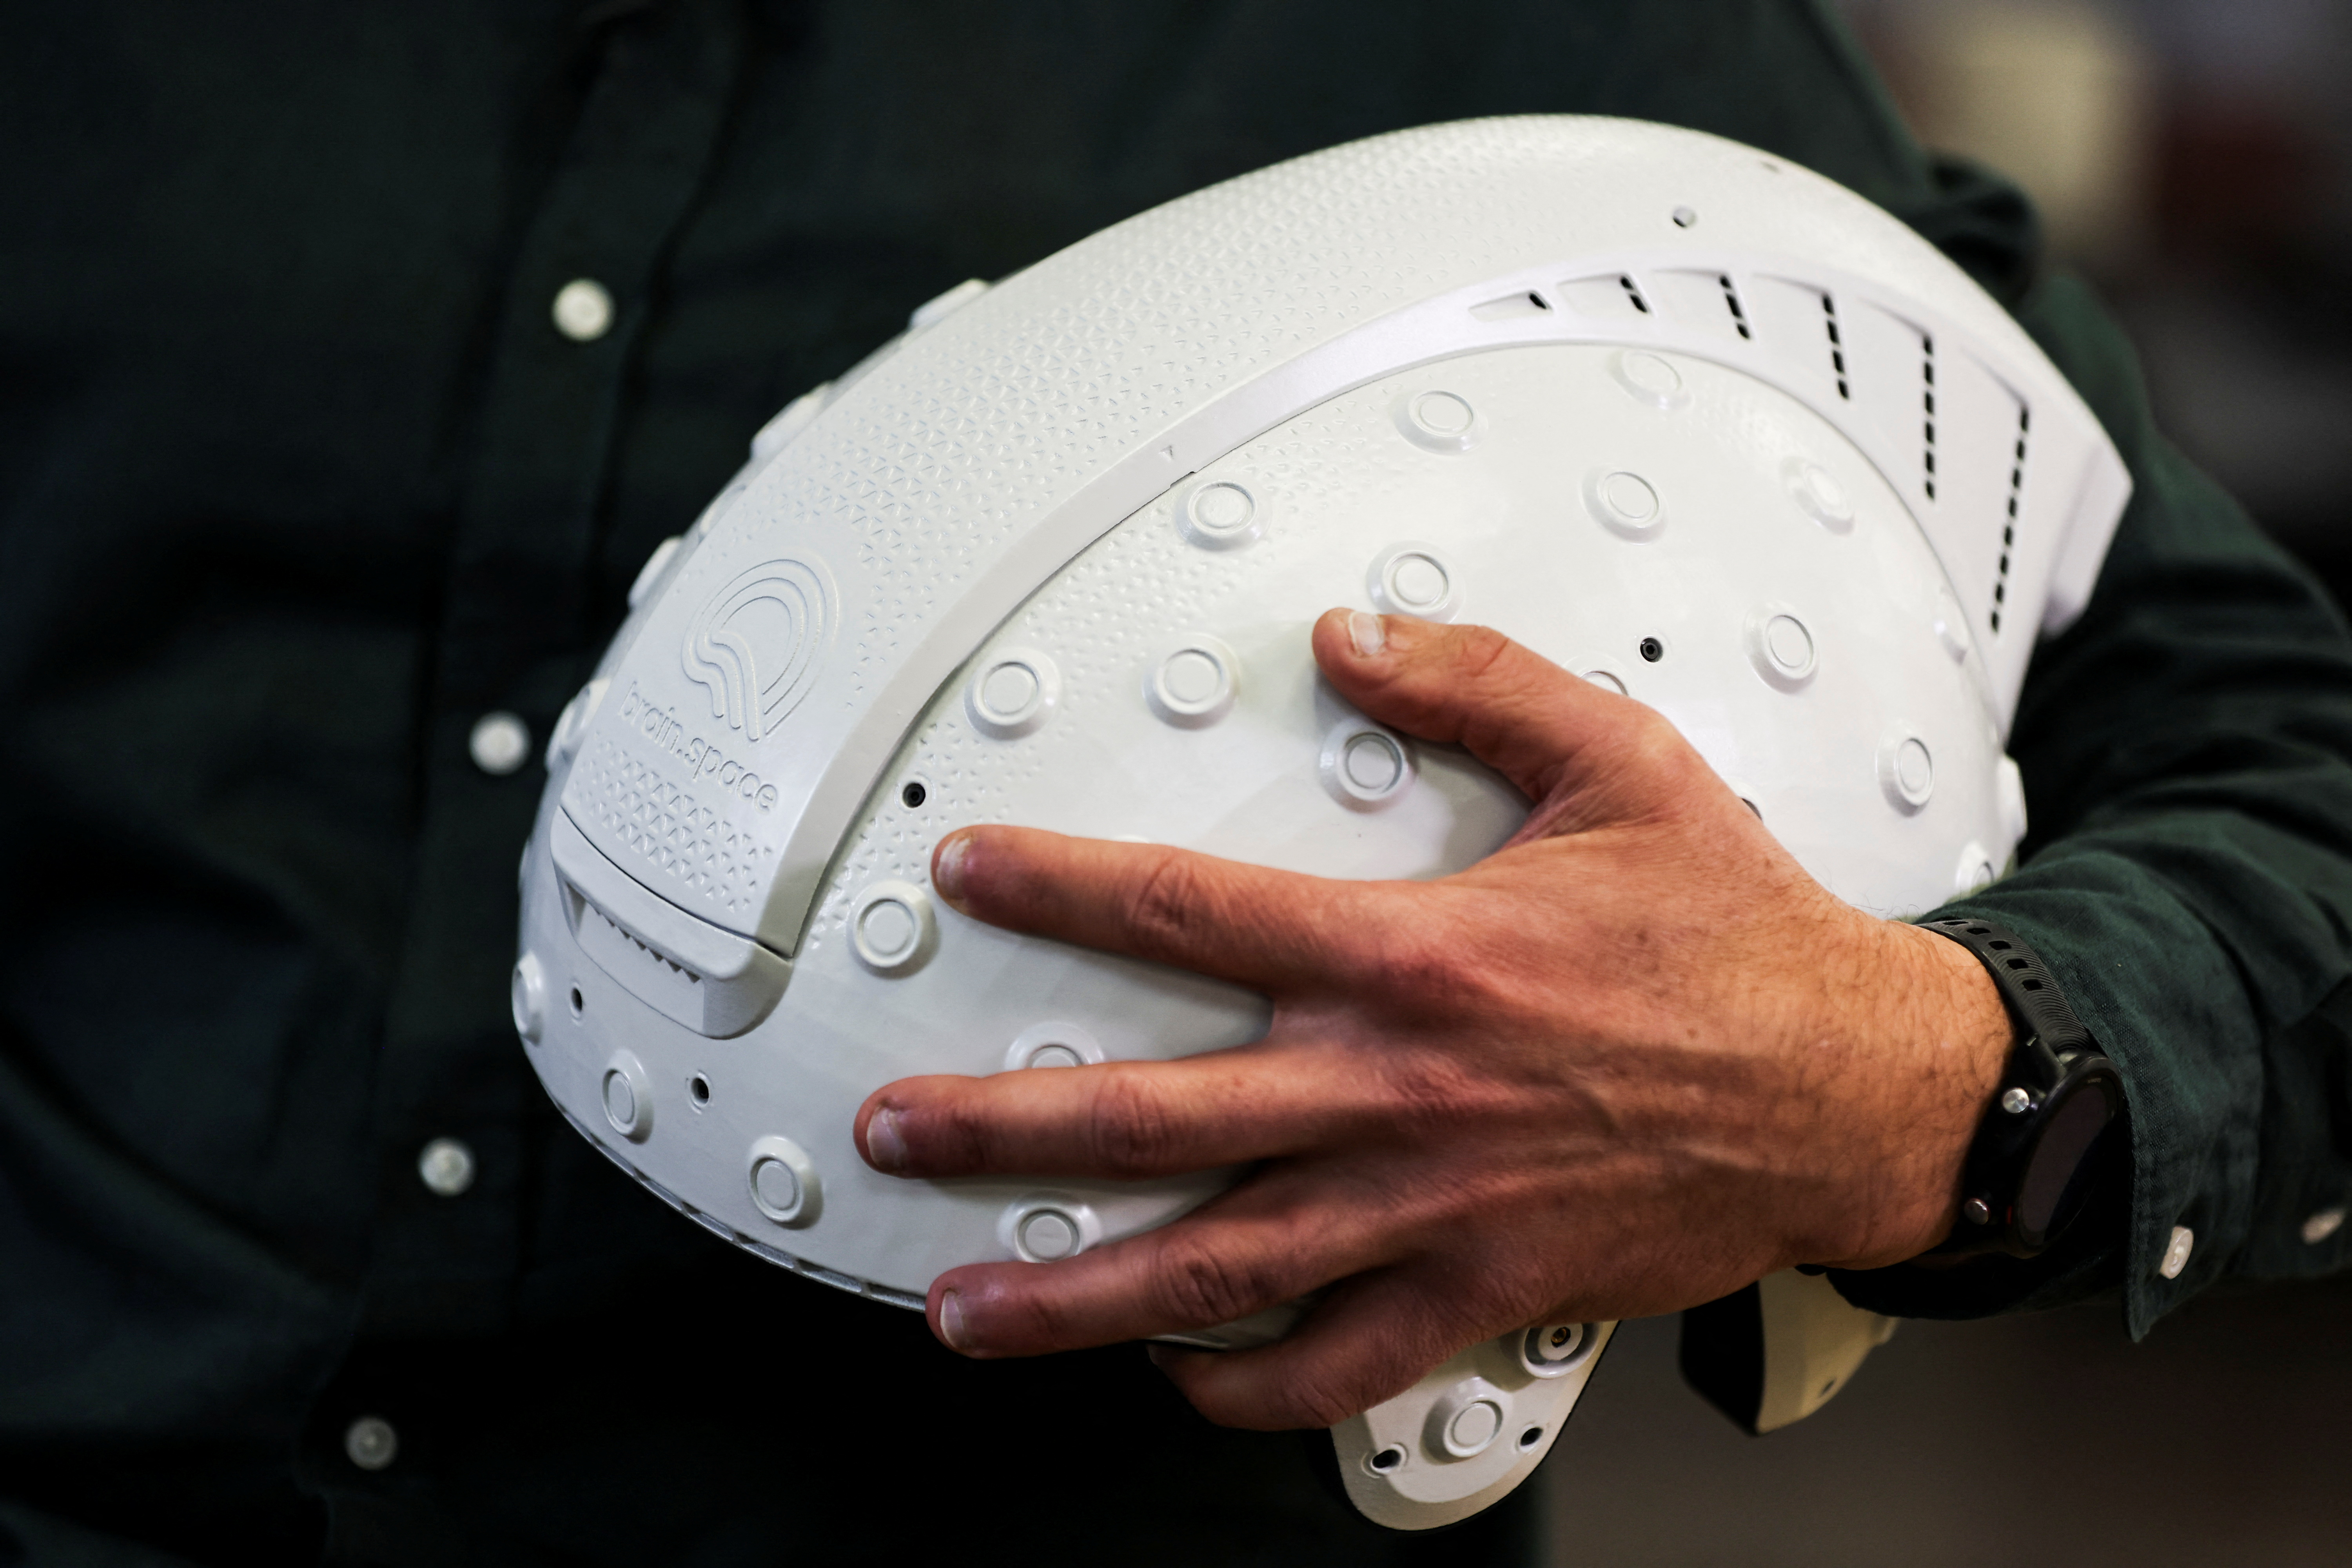 A model of an EEG enabled helmet, due to be used in an experiment on the impact of a microgravity environment on brain activity is displayed at Israeli startup Brain.Space in Tel Aviv